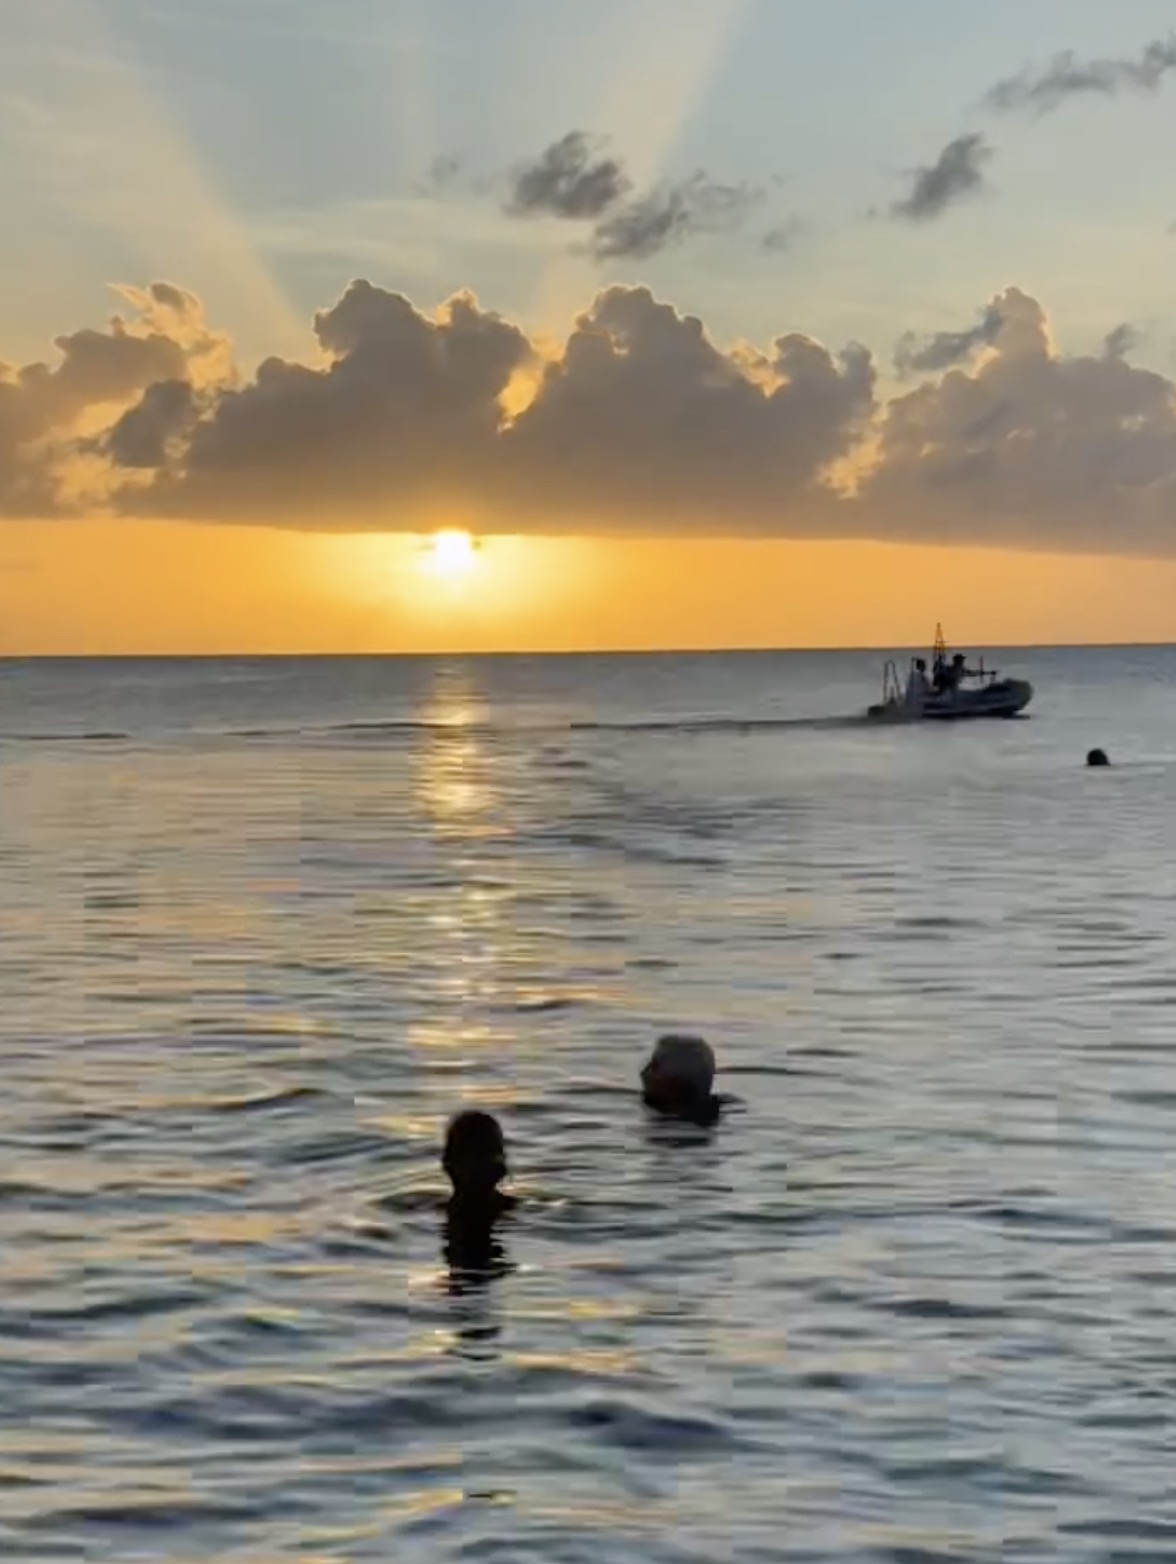 Kelly shared a time-lapse video that showed the sun setting into the ocean